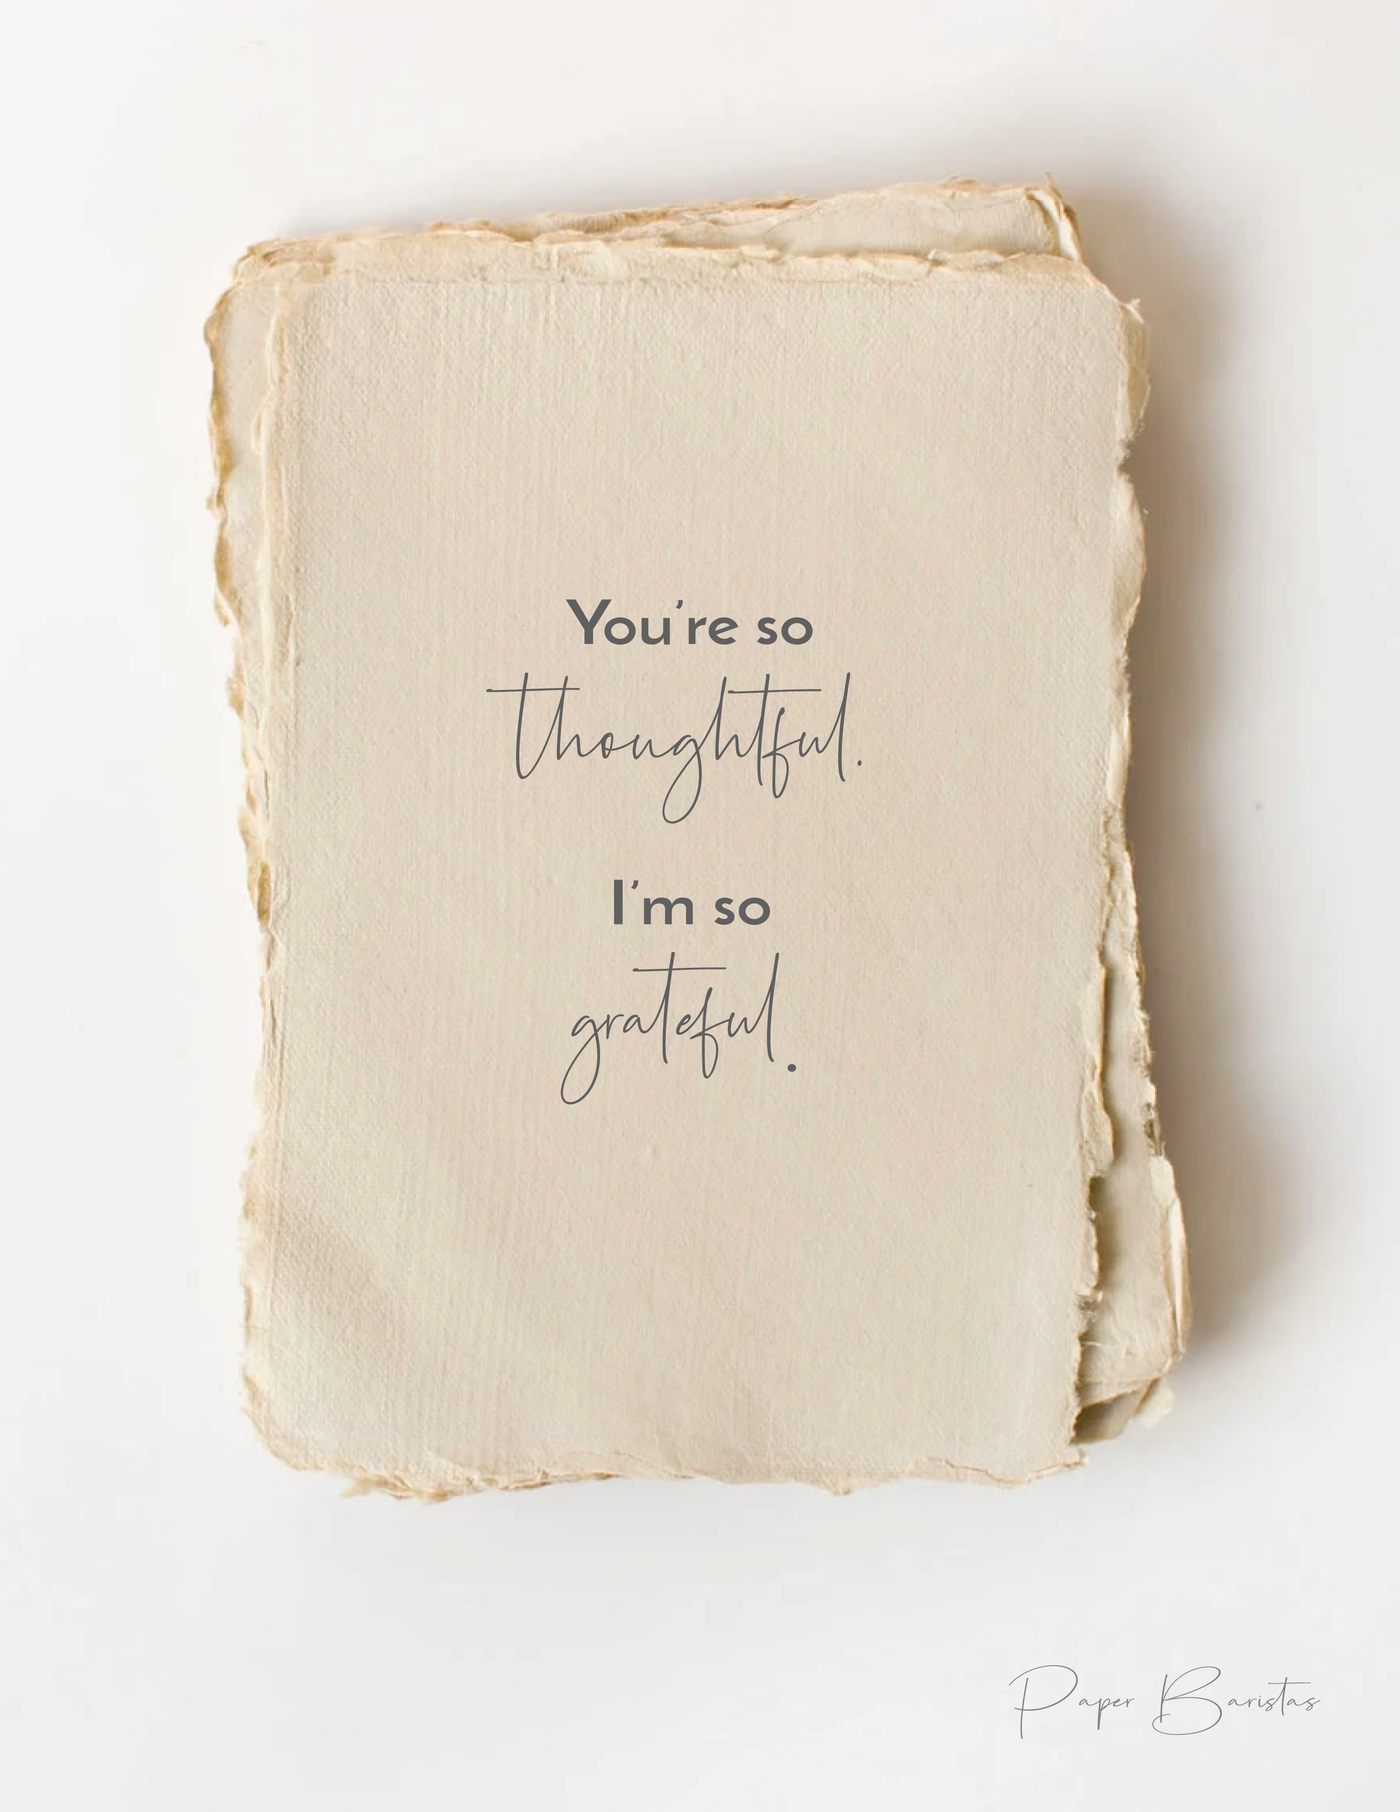 "You're so thoughtful."  Thank you Greeting Card